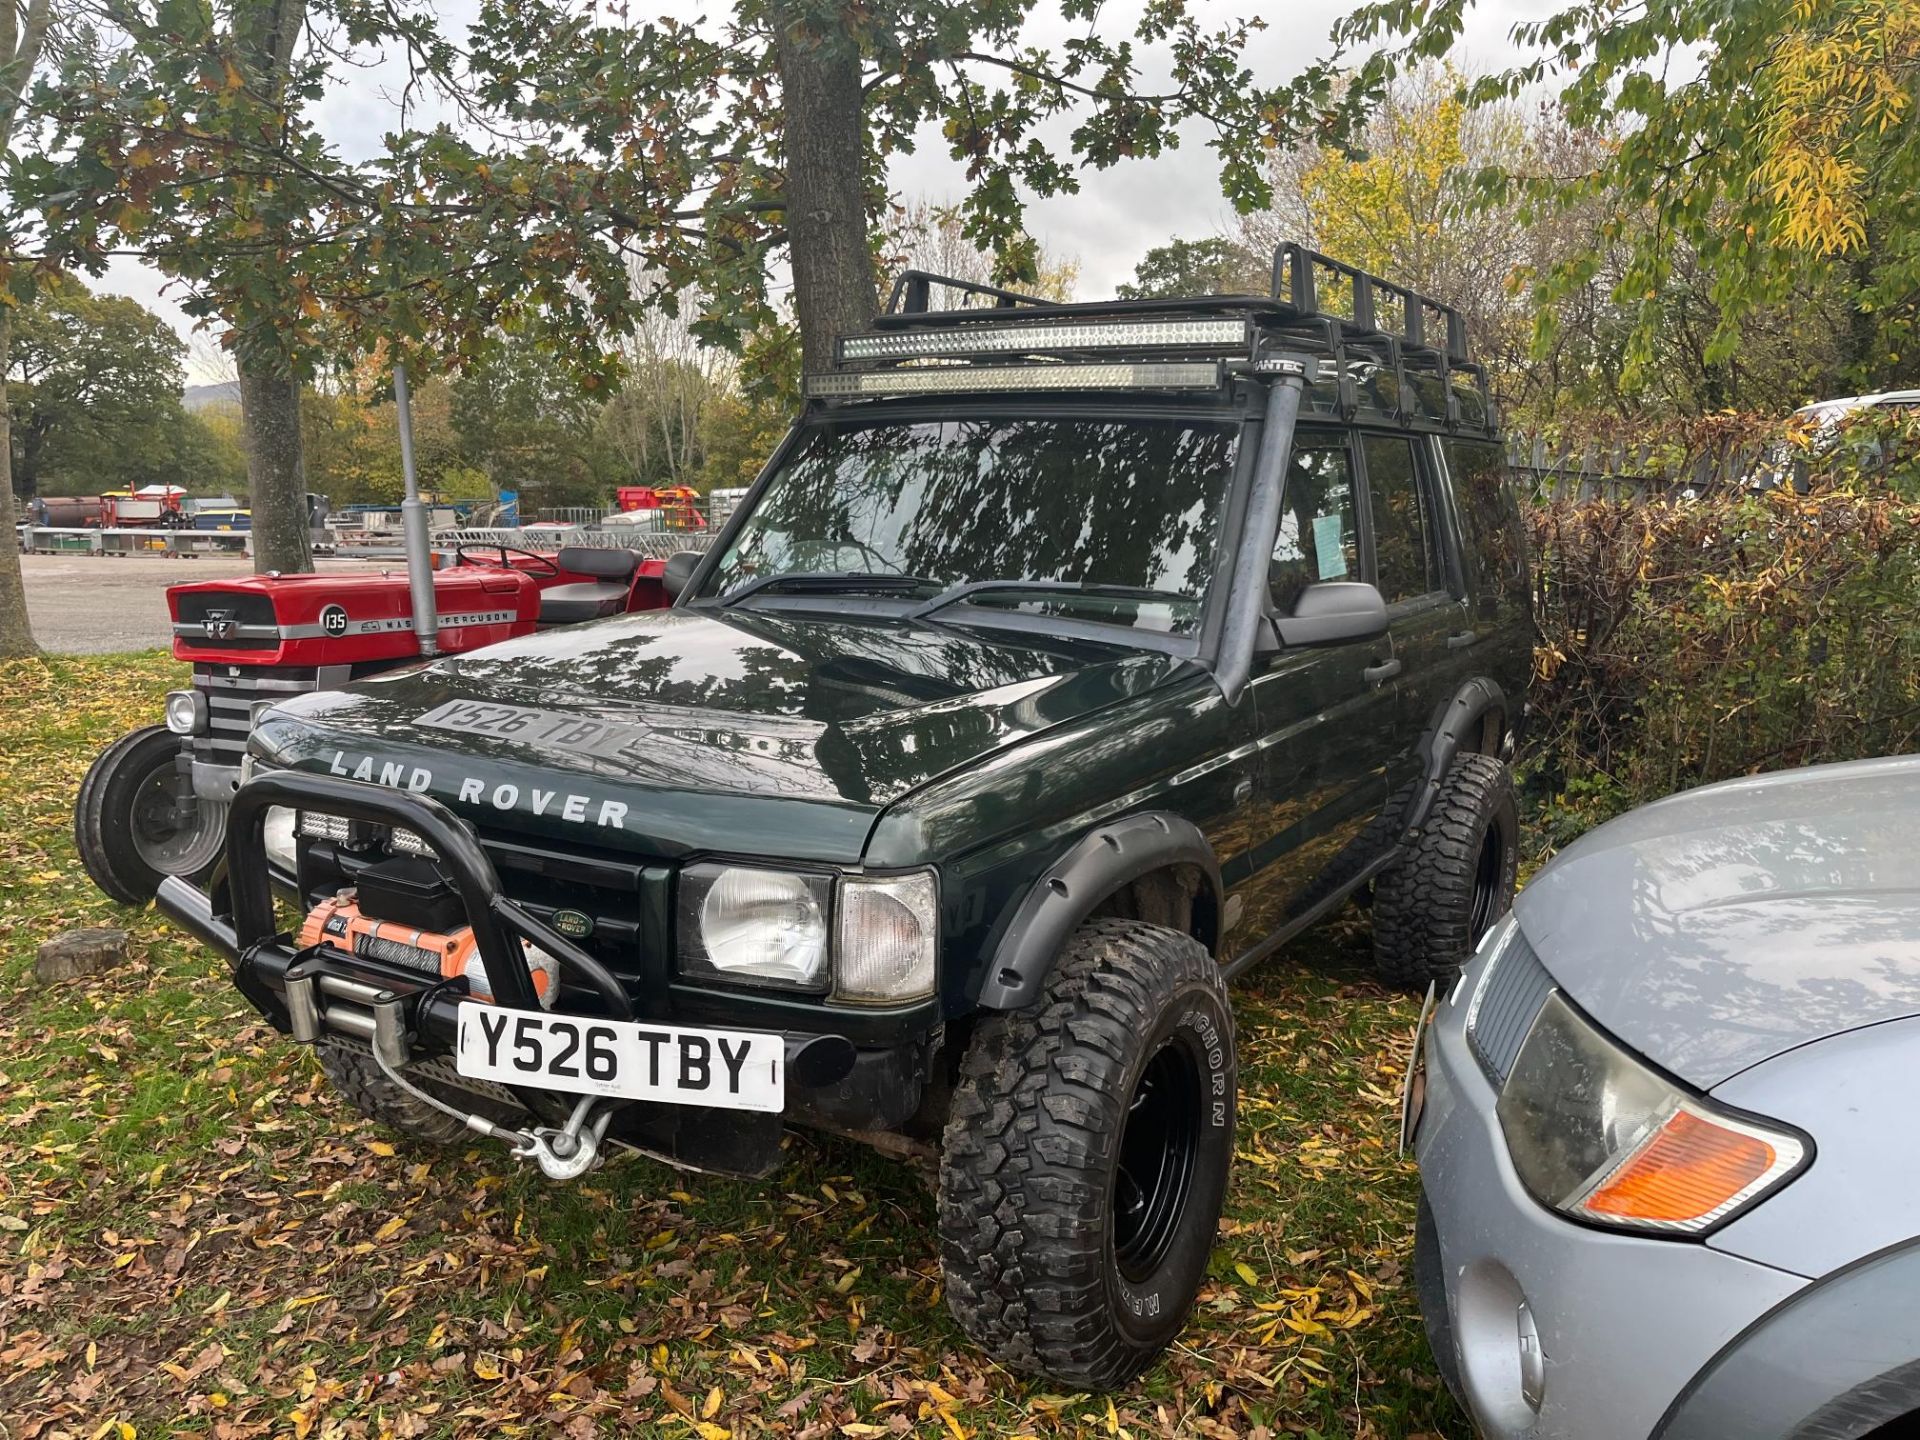 LAND ROVER DISCOVERY (Y526 TBY) - Image 3 of 3